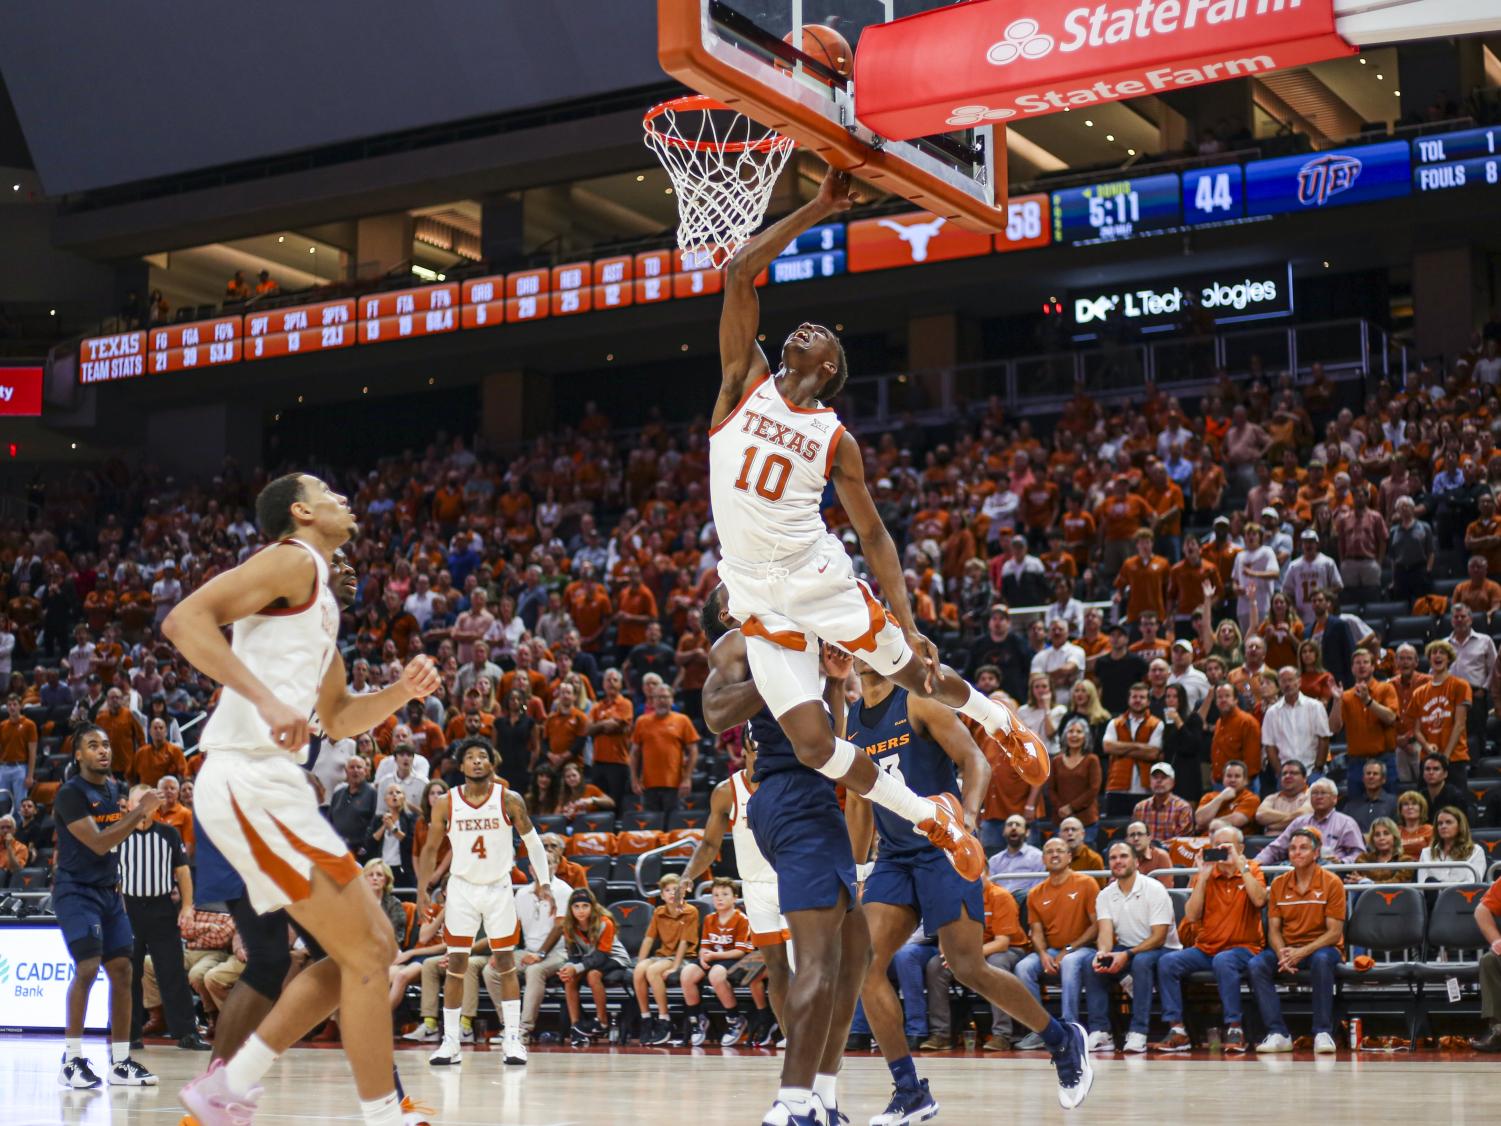 Texas Longhorns to play first basketball game at Gregory Gym since